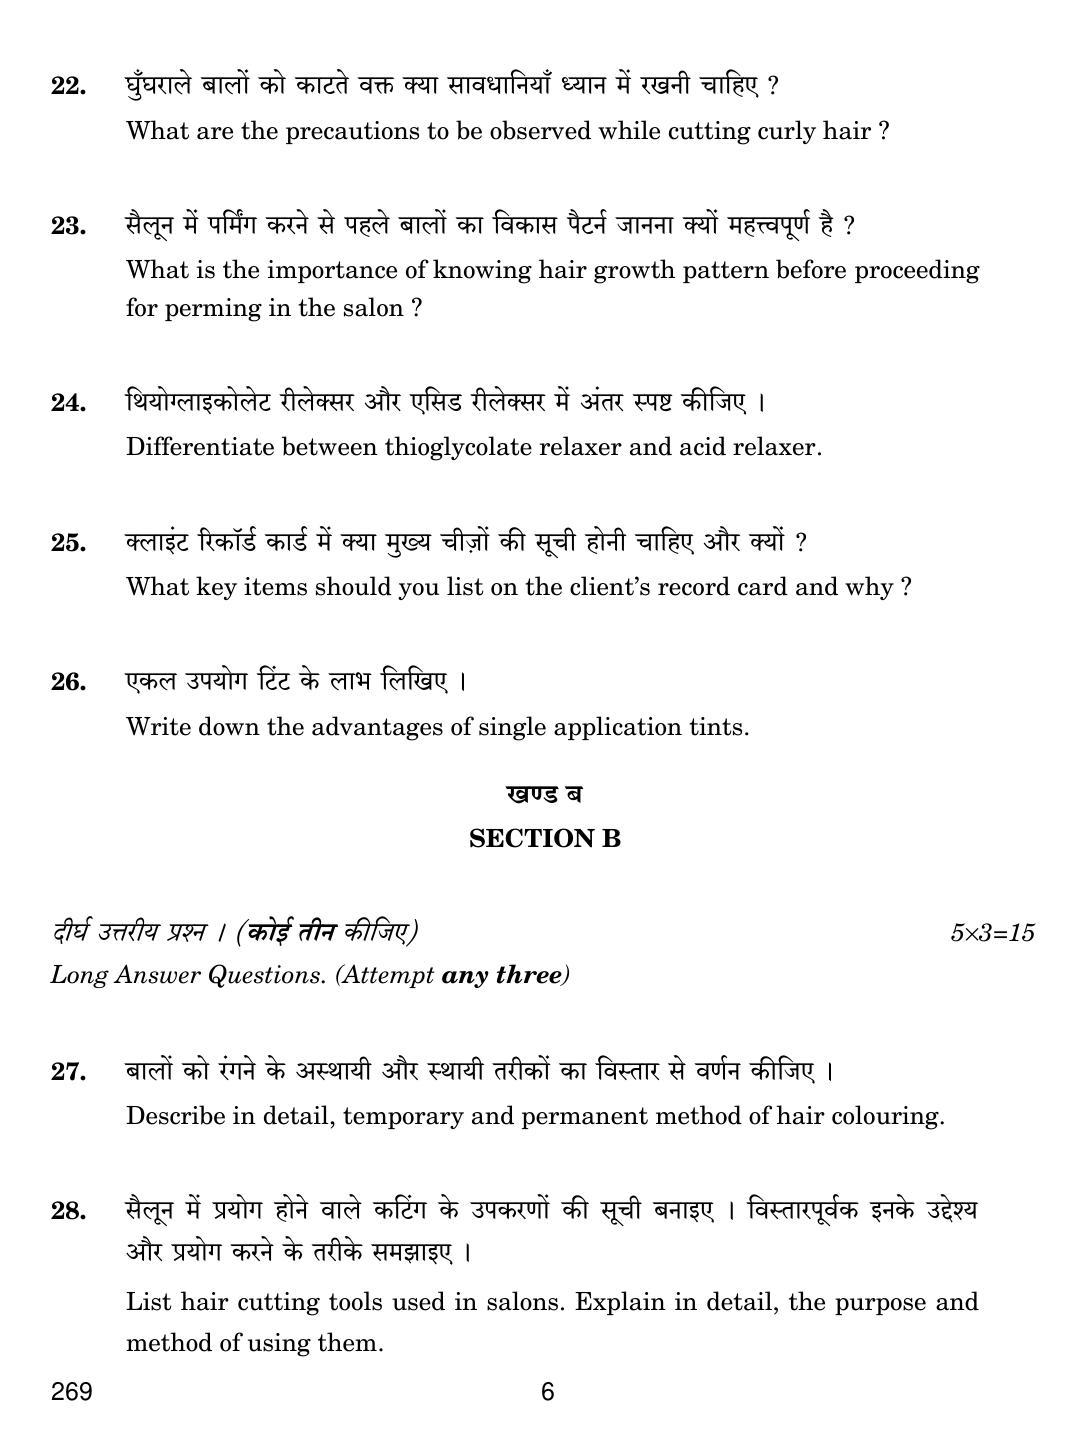 CBSE Class 12 269 BEAUTY AND HAIR 2019 Compartment Question Paper - Page 6